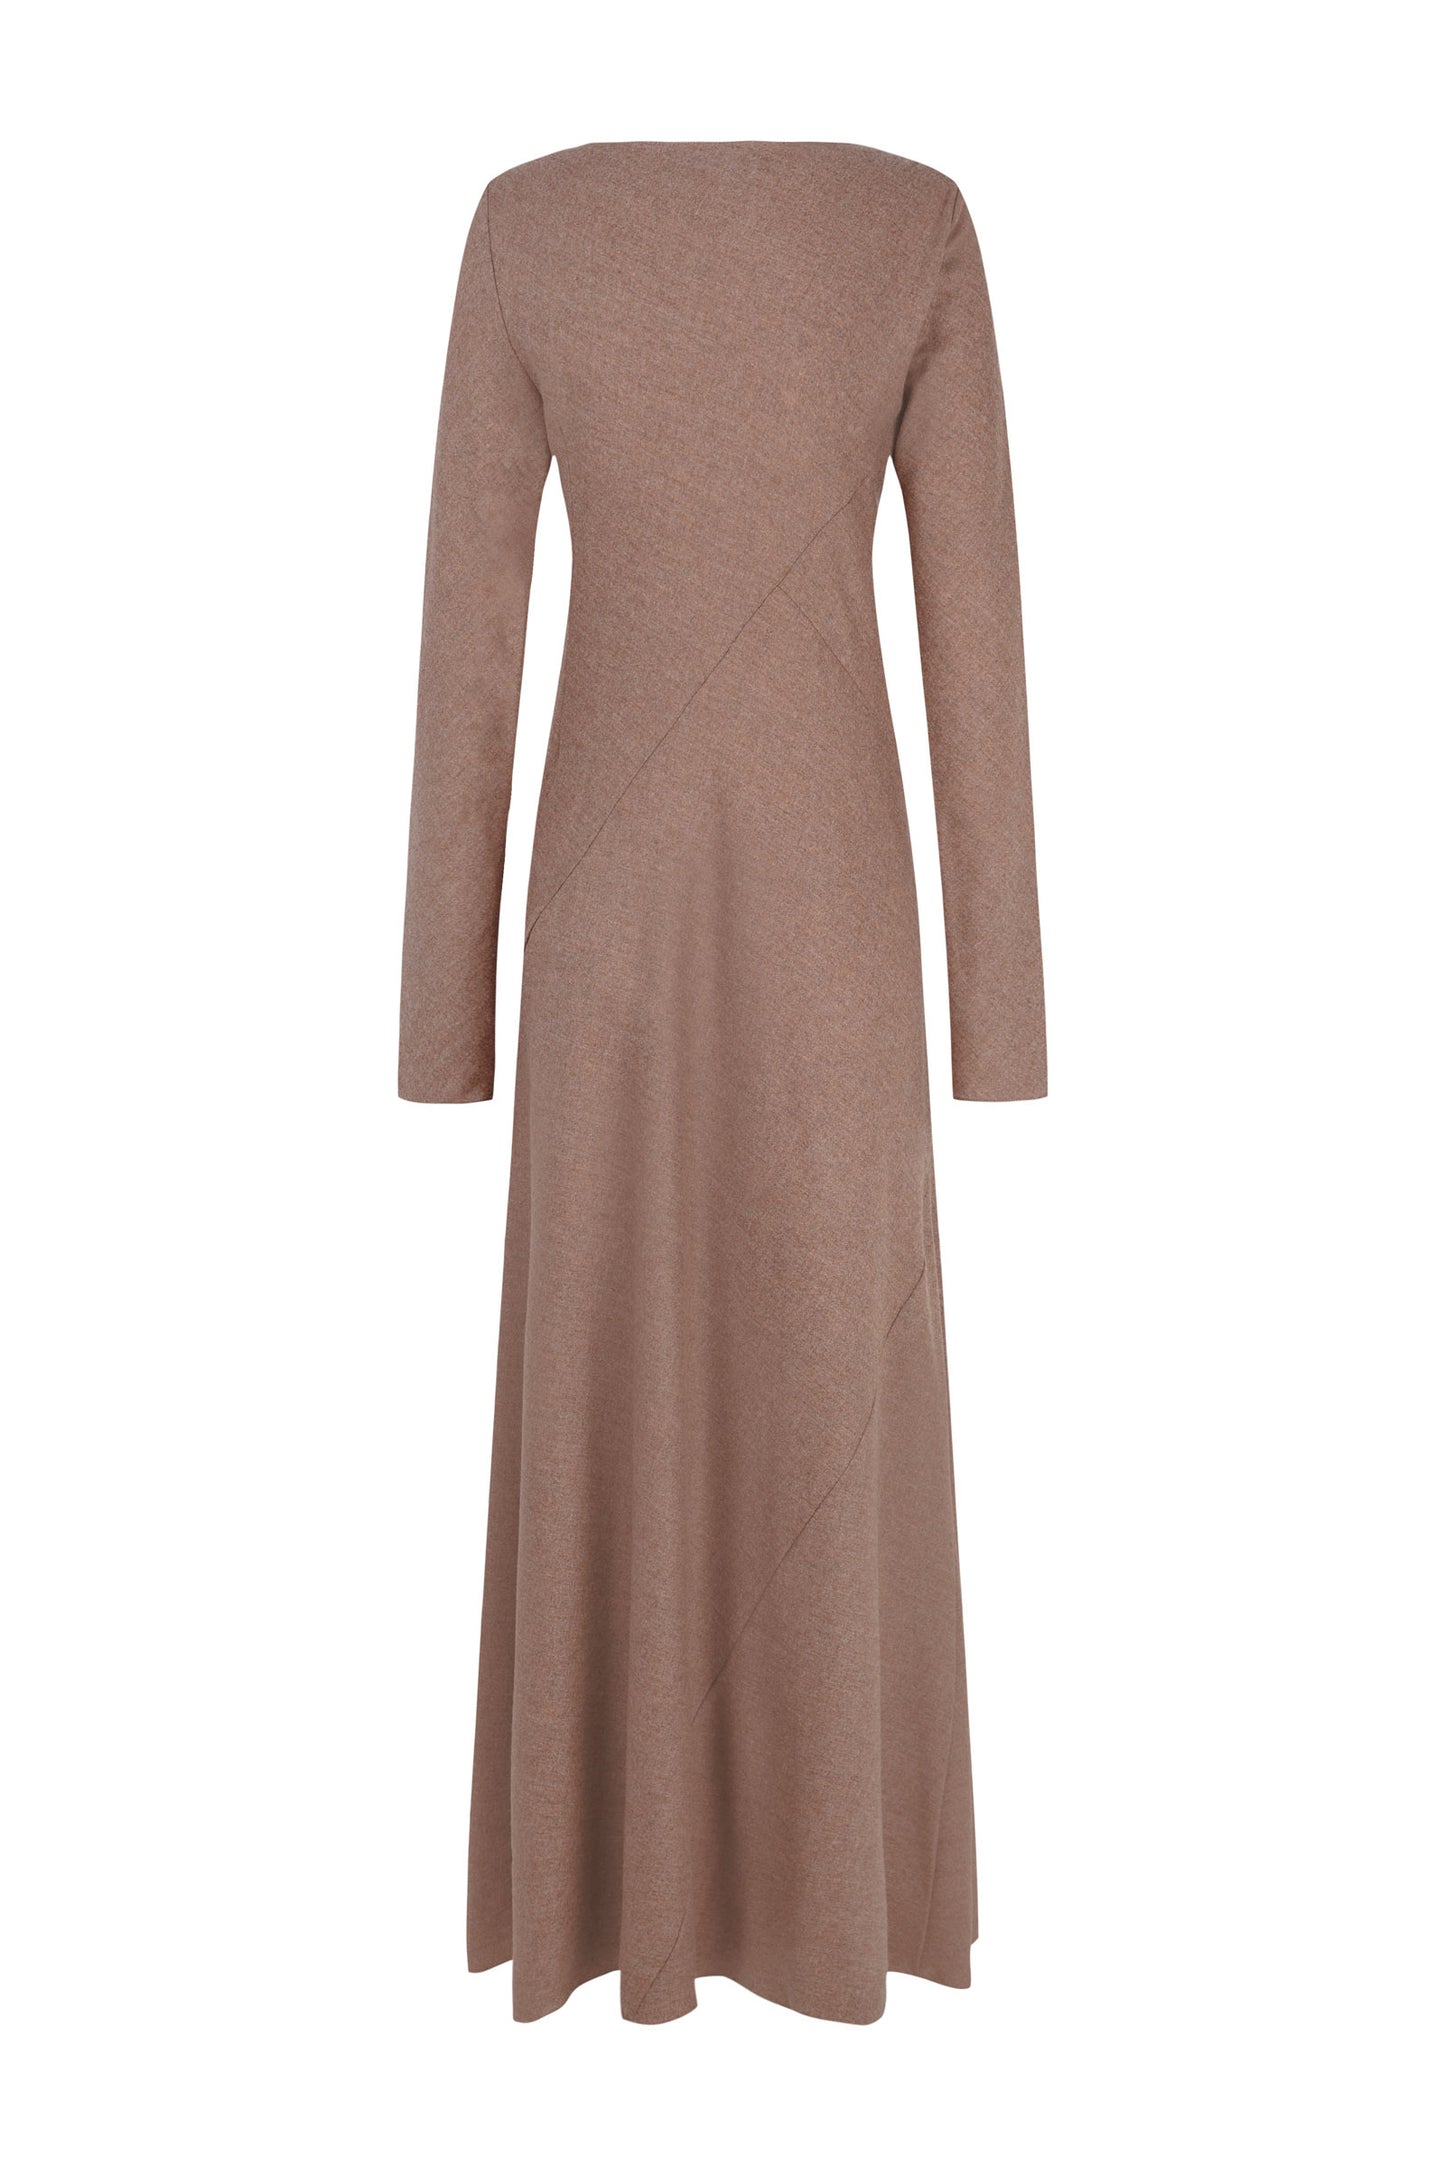 Lanna, cappuccino virgin wool and cashmere dress